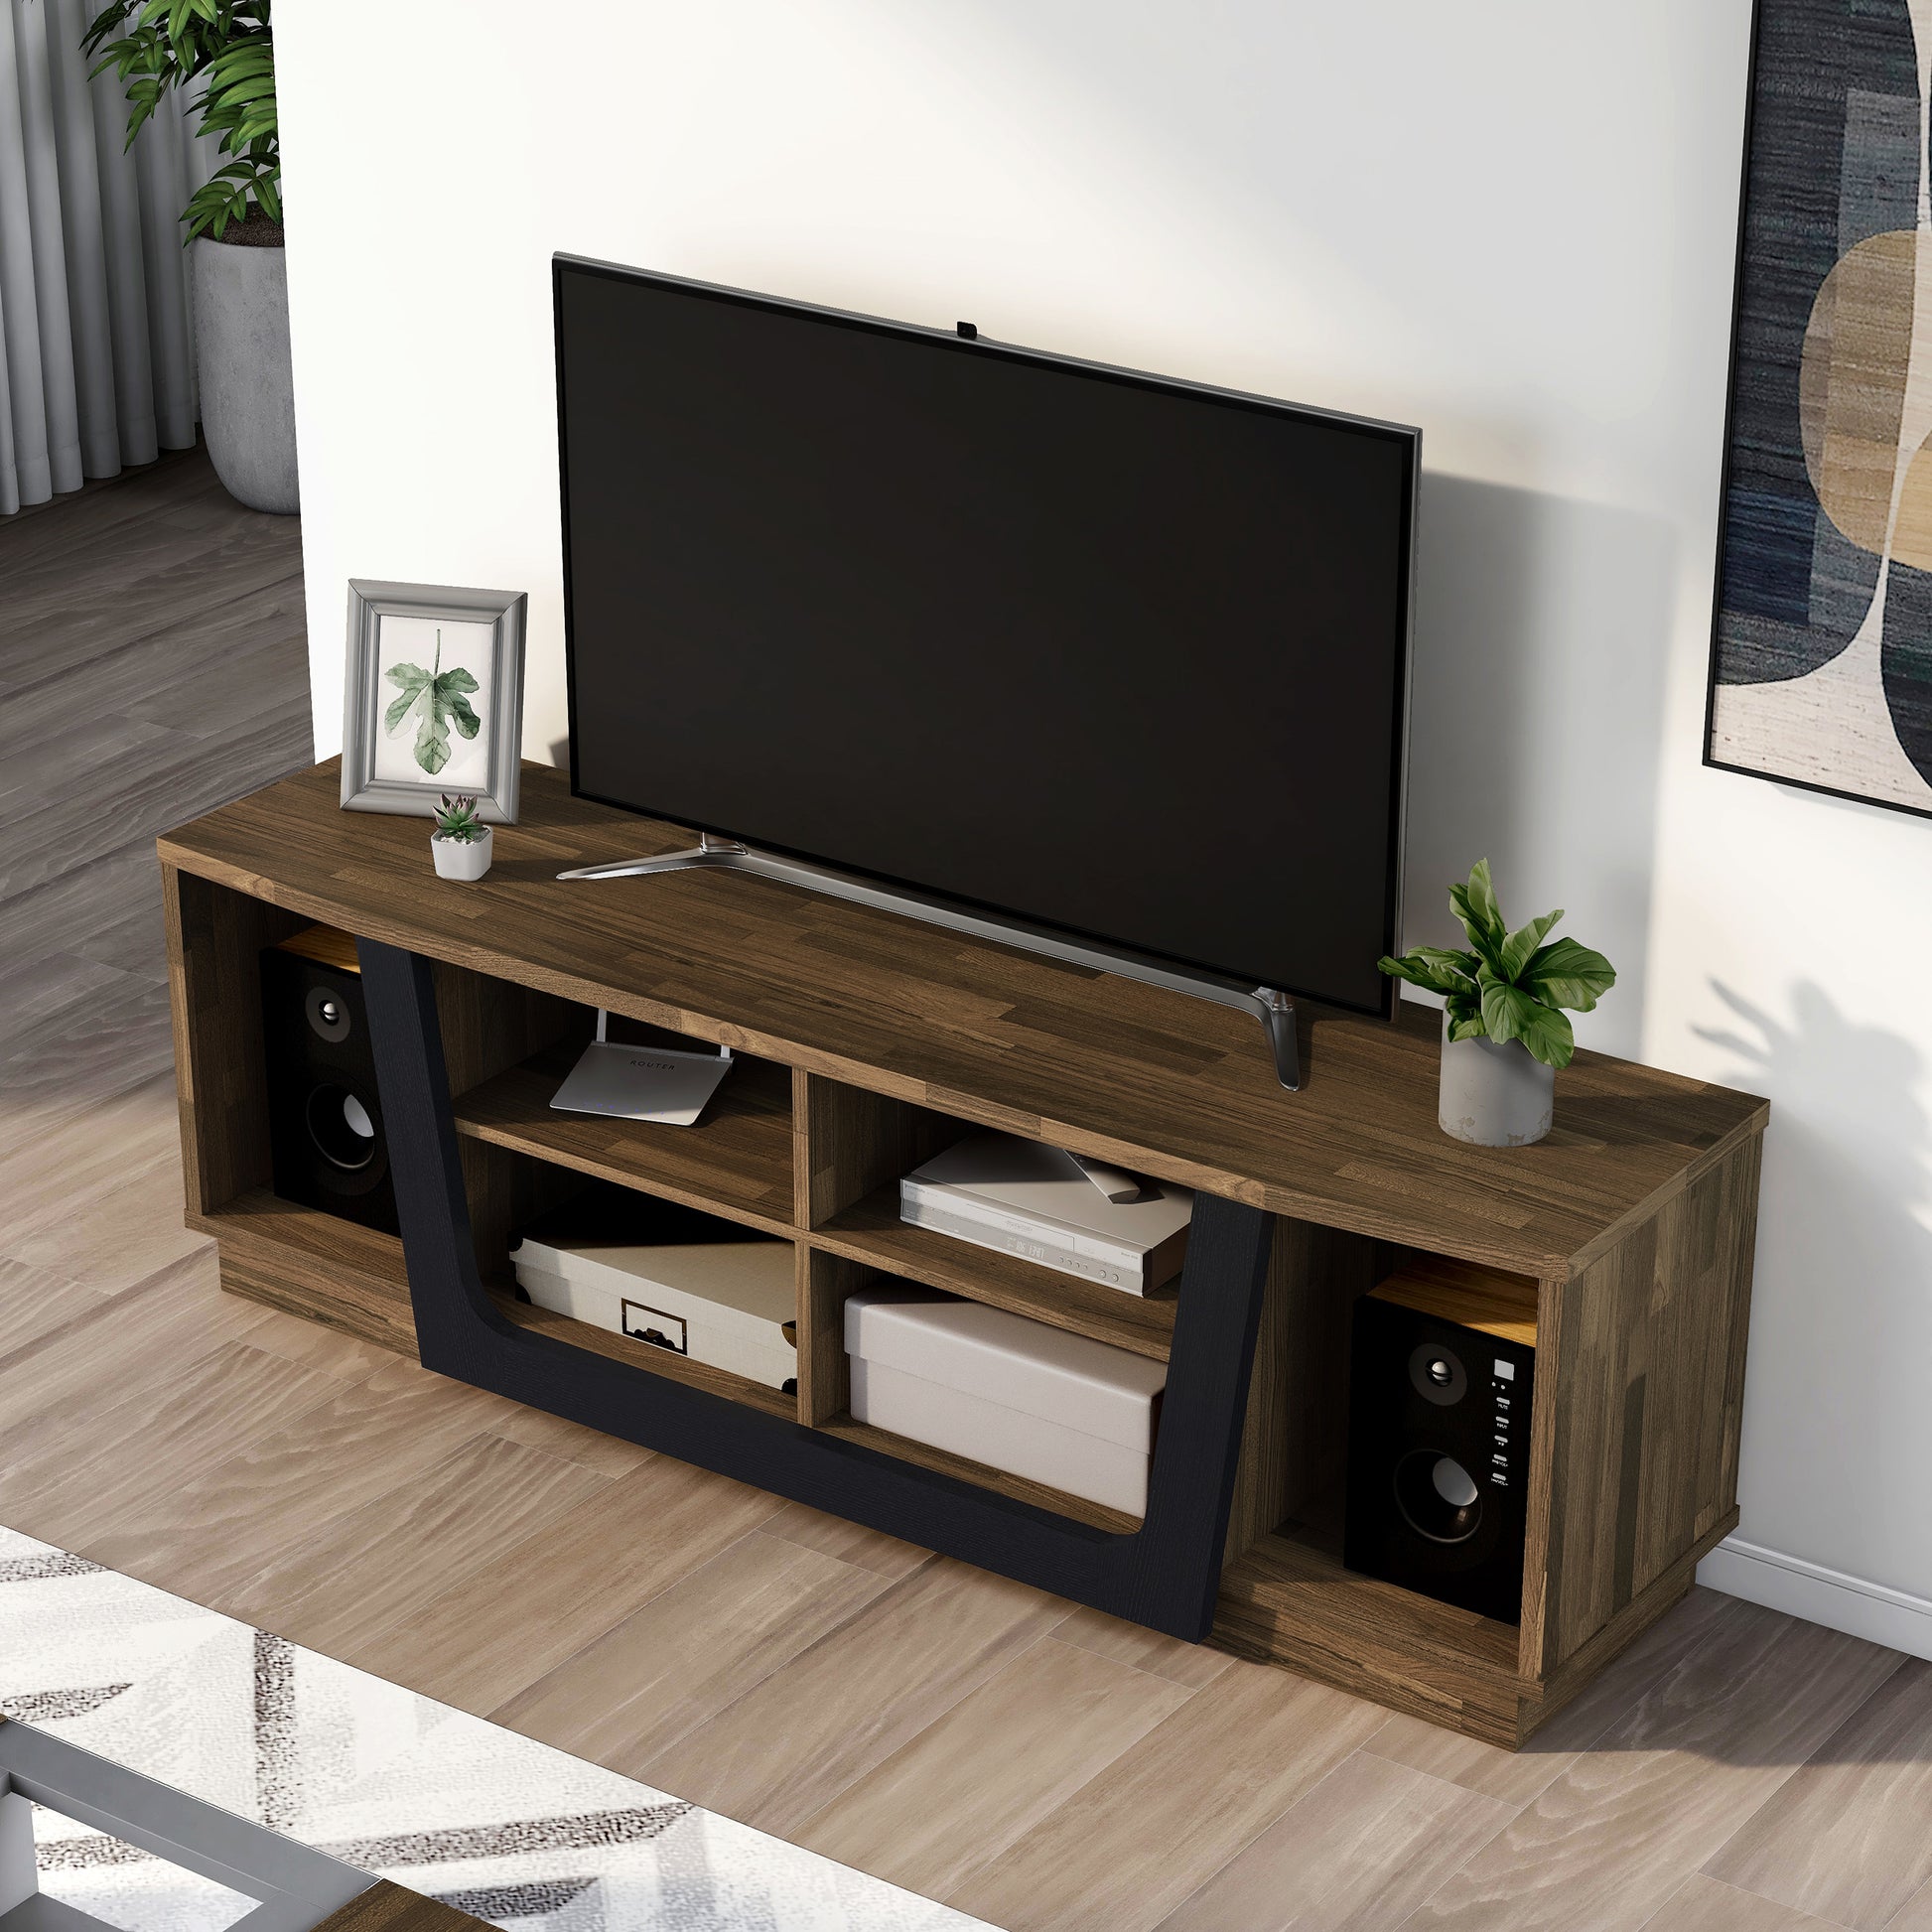 Left angled bird's eye view of a contemporary light hickory and black six-shelf TV stand in a living room with accessories